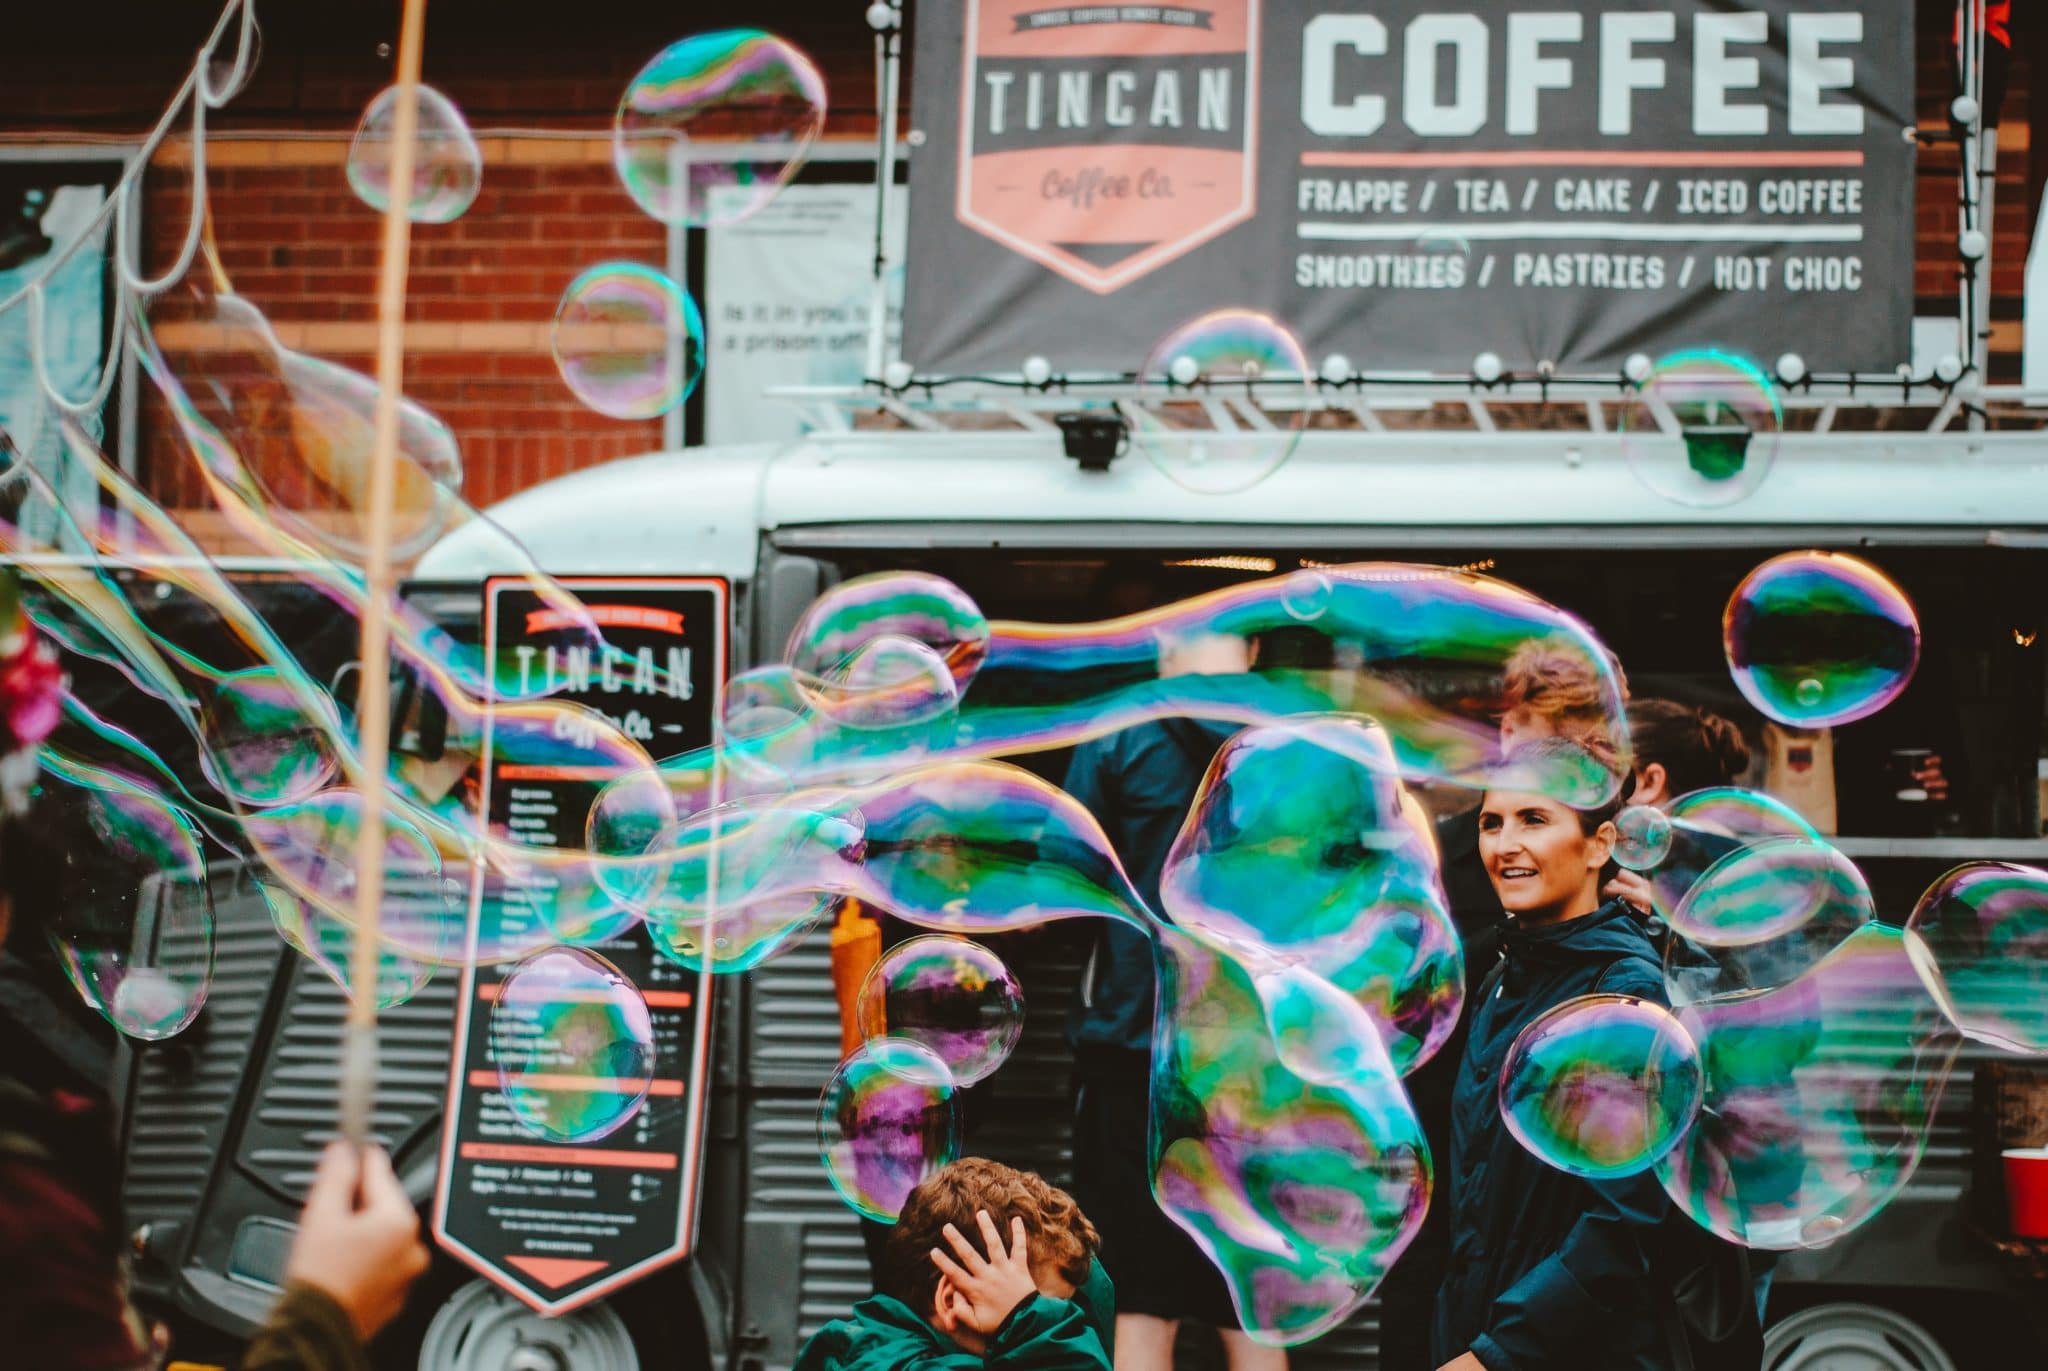 Students having fun making bubbles outside of a coffee shop